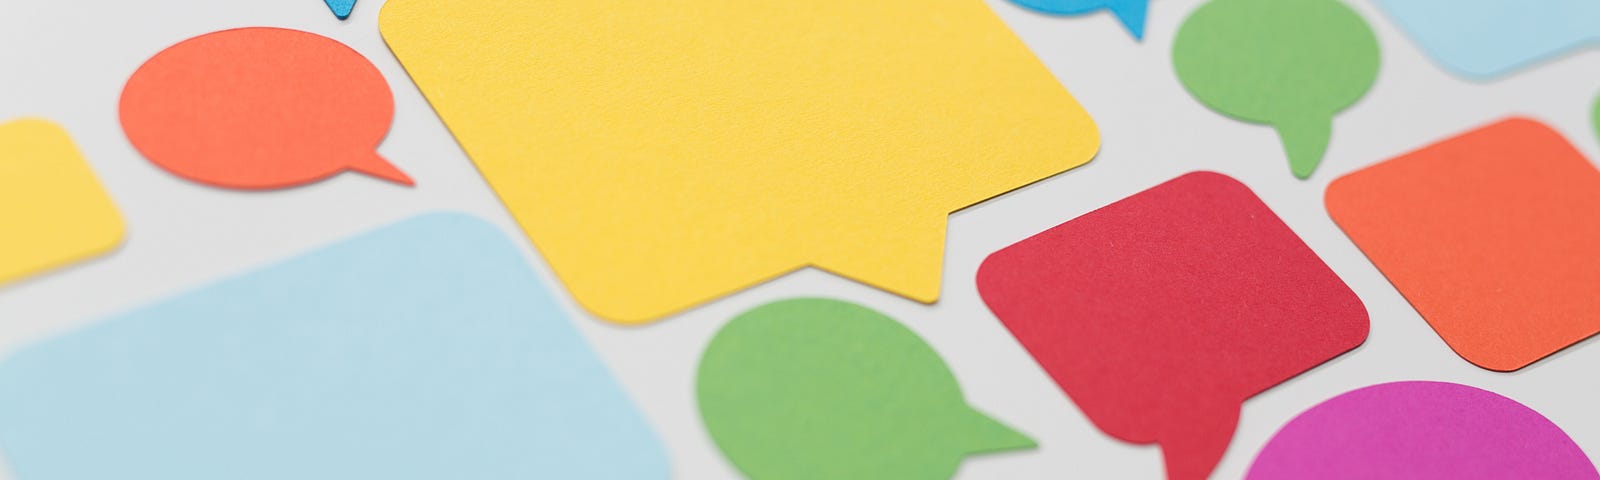 image of a variety of colorful speech bubble paper cut-outs on a white background